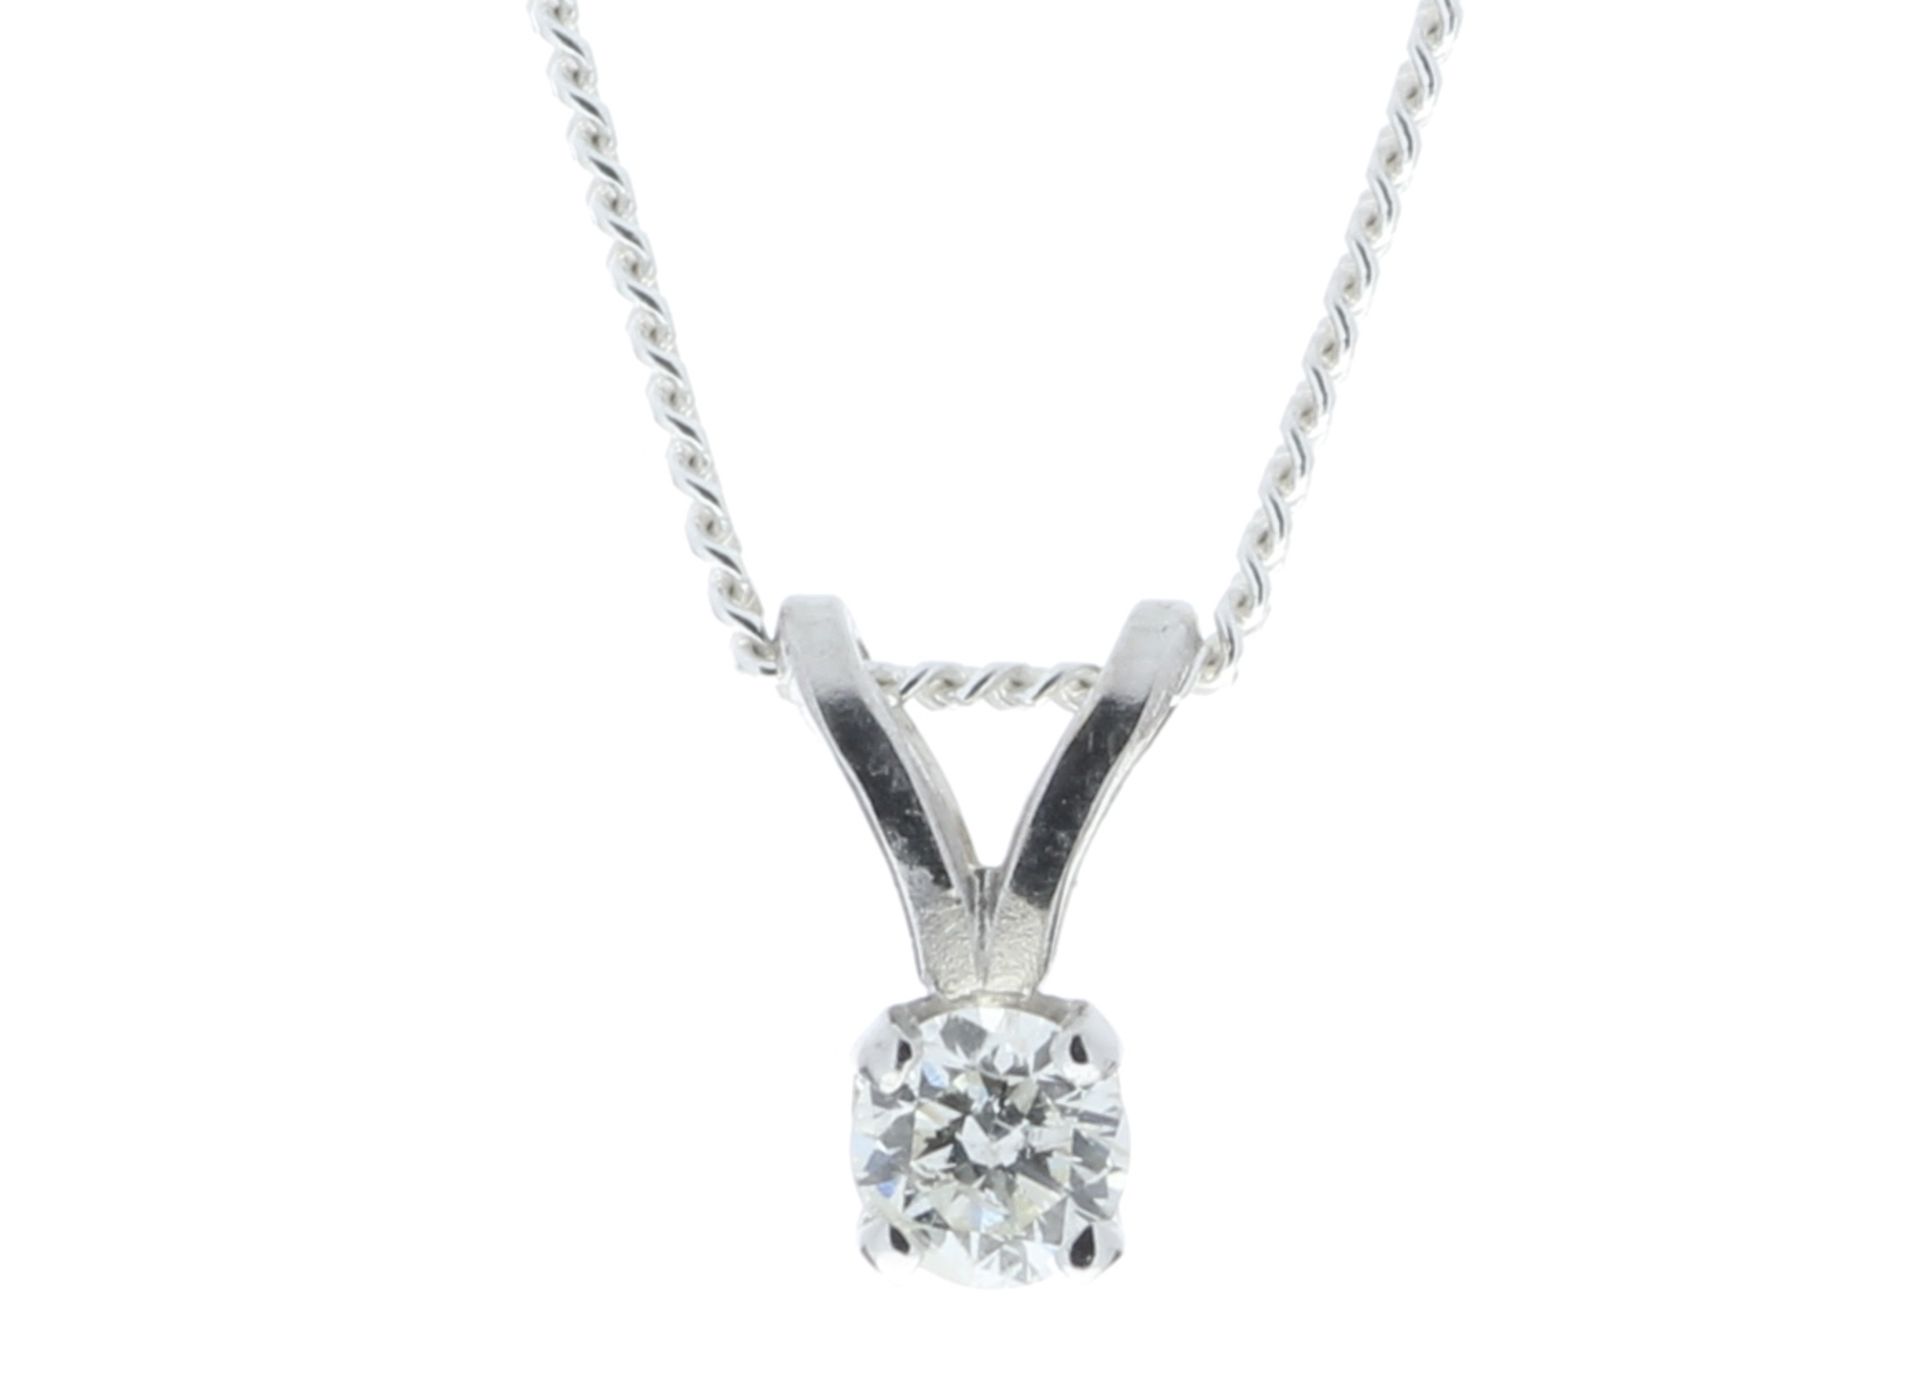 9ct White Gold Claw Set Diamond Pendant 0.10 Carats - Valued By GIE £1,625.00 - A beautiful round